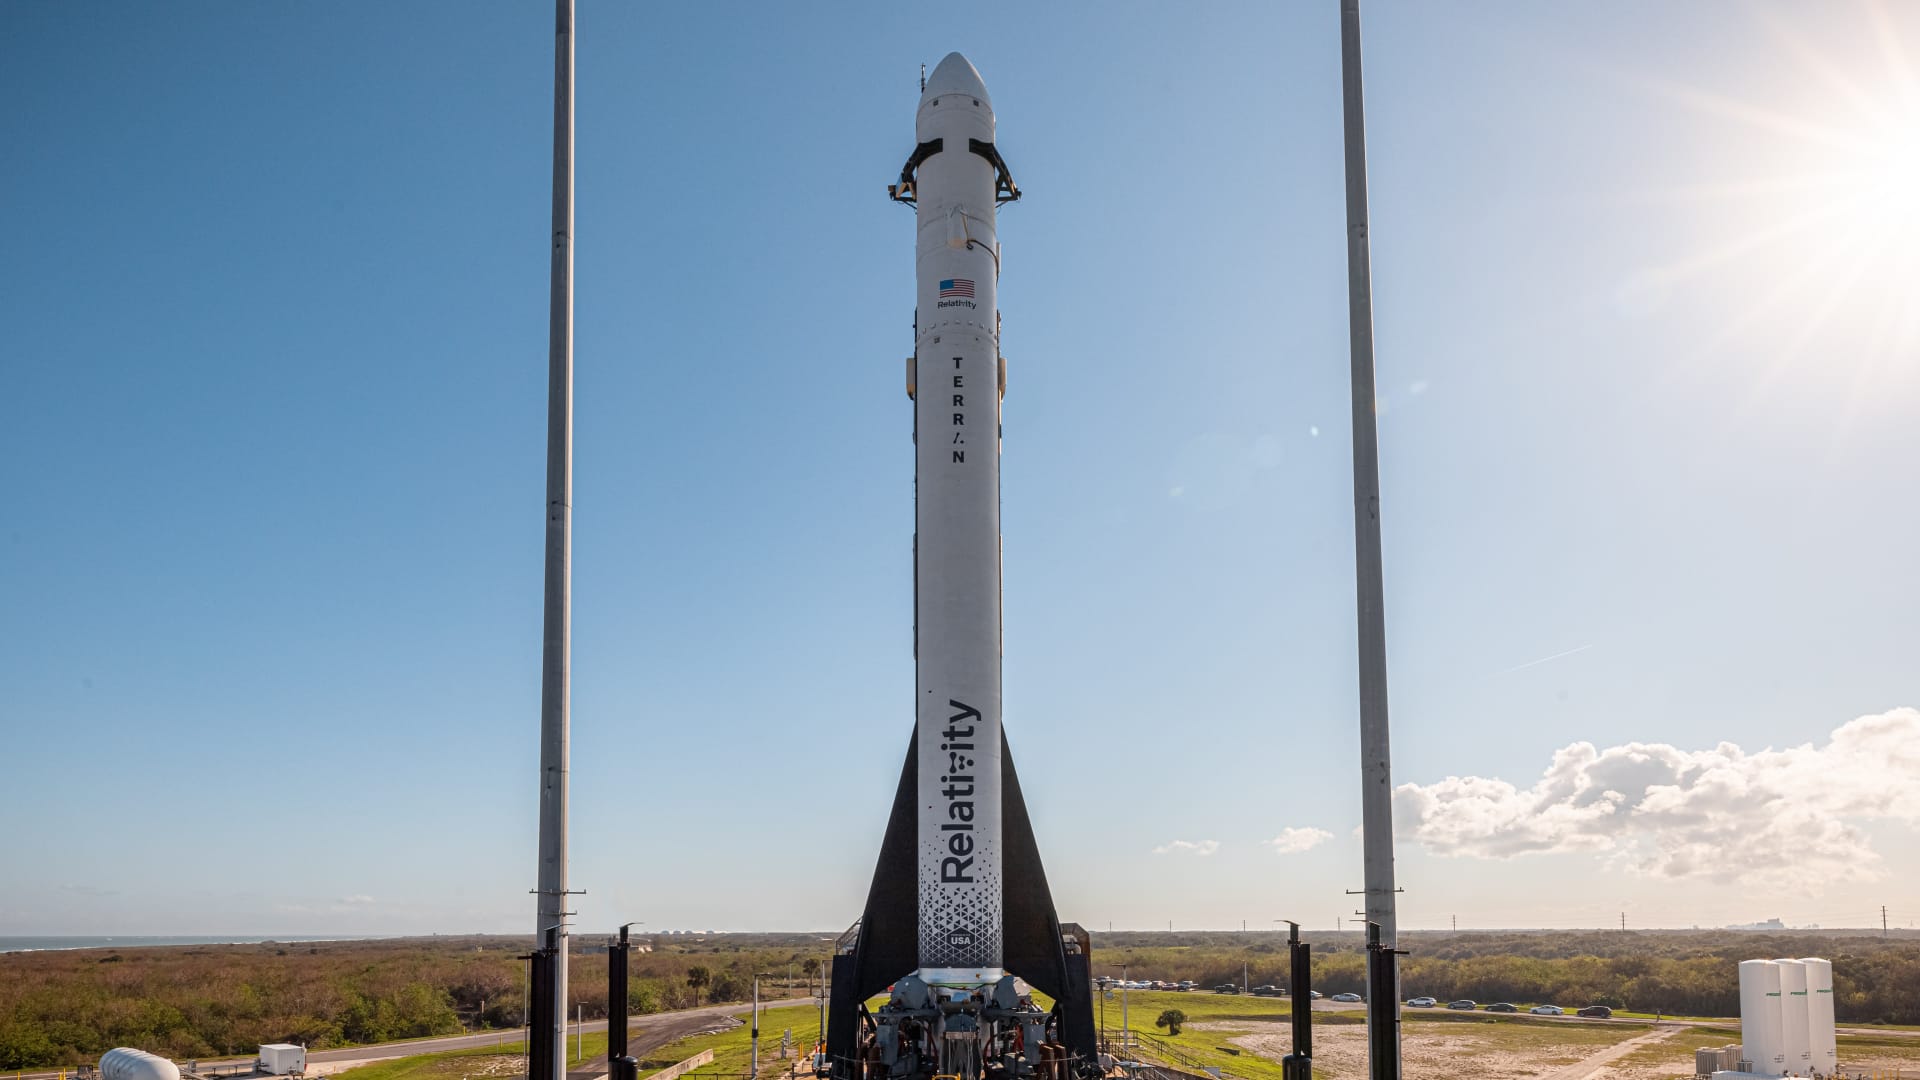 The company's Terran 1 rocket stands on its launchpad at LC-16 in Cape Canaveral, Florida ahead of the inaugural launch attempt.